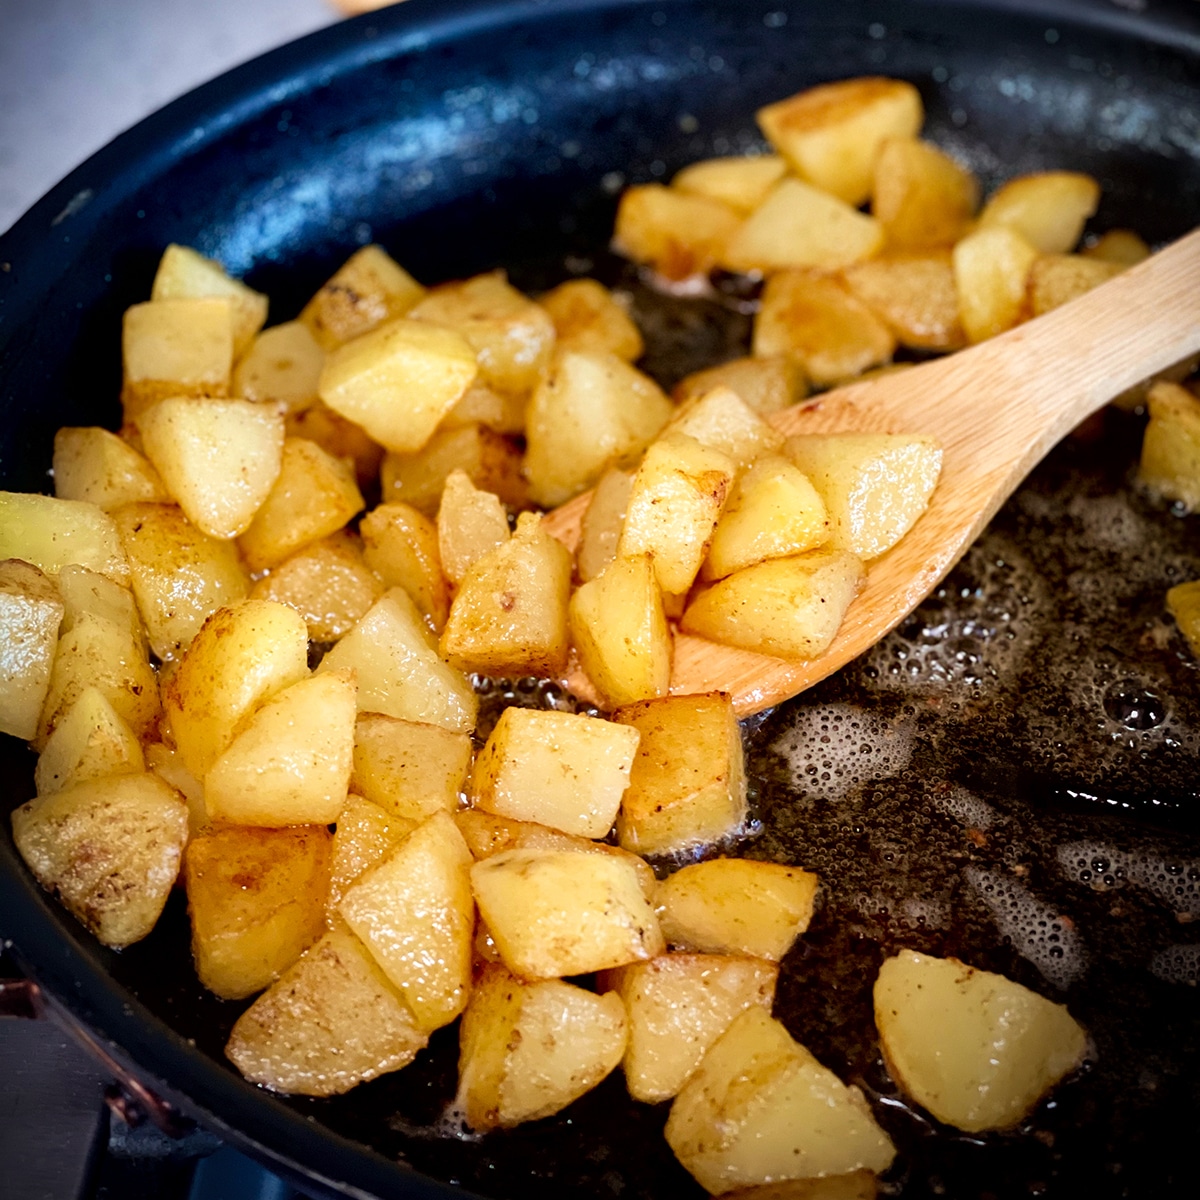 Someone using a wood spoon to stir potatoes in a hot skillet while they fry in butter and oil.